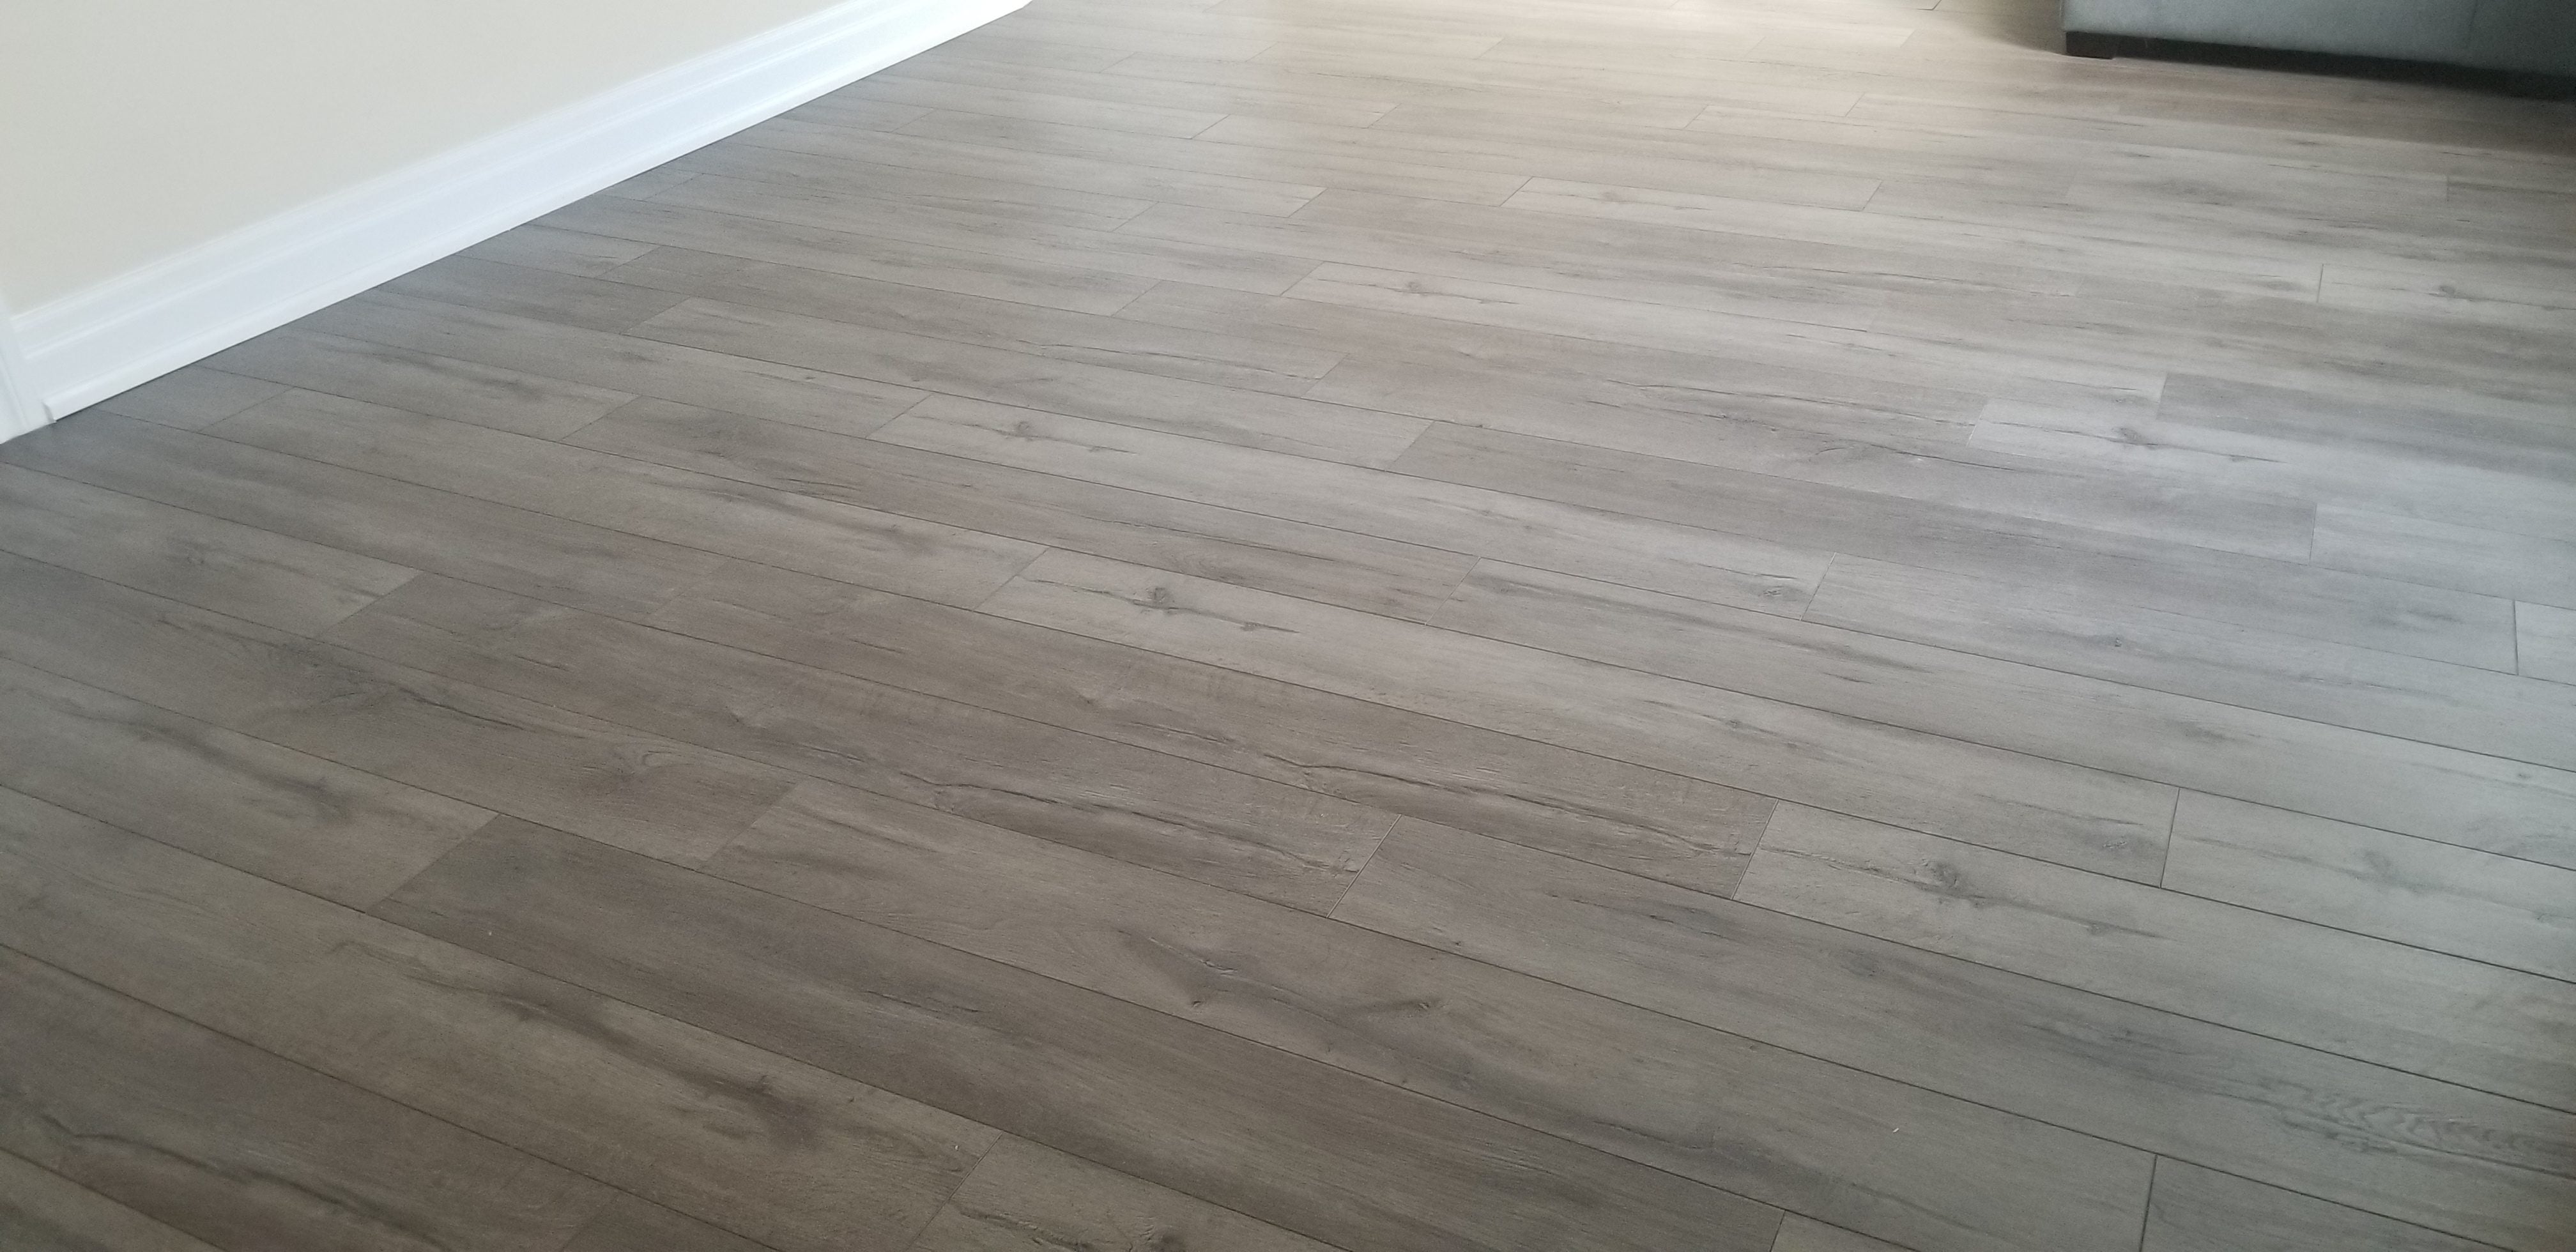 [Costco] Golden select laminate flooring $19.89 - Page 3 - RedFlagDeals ...
